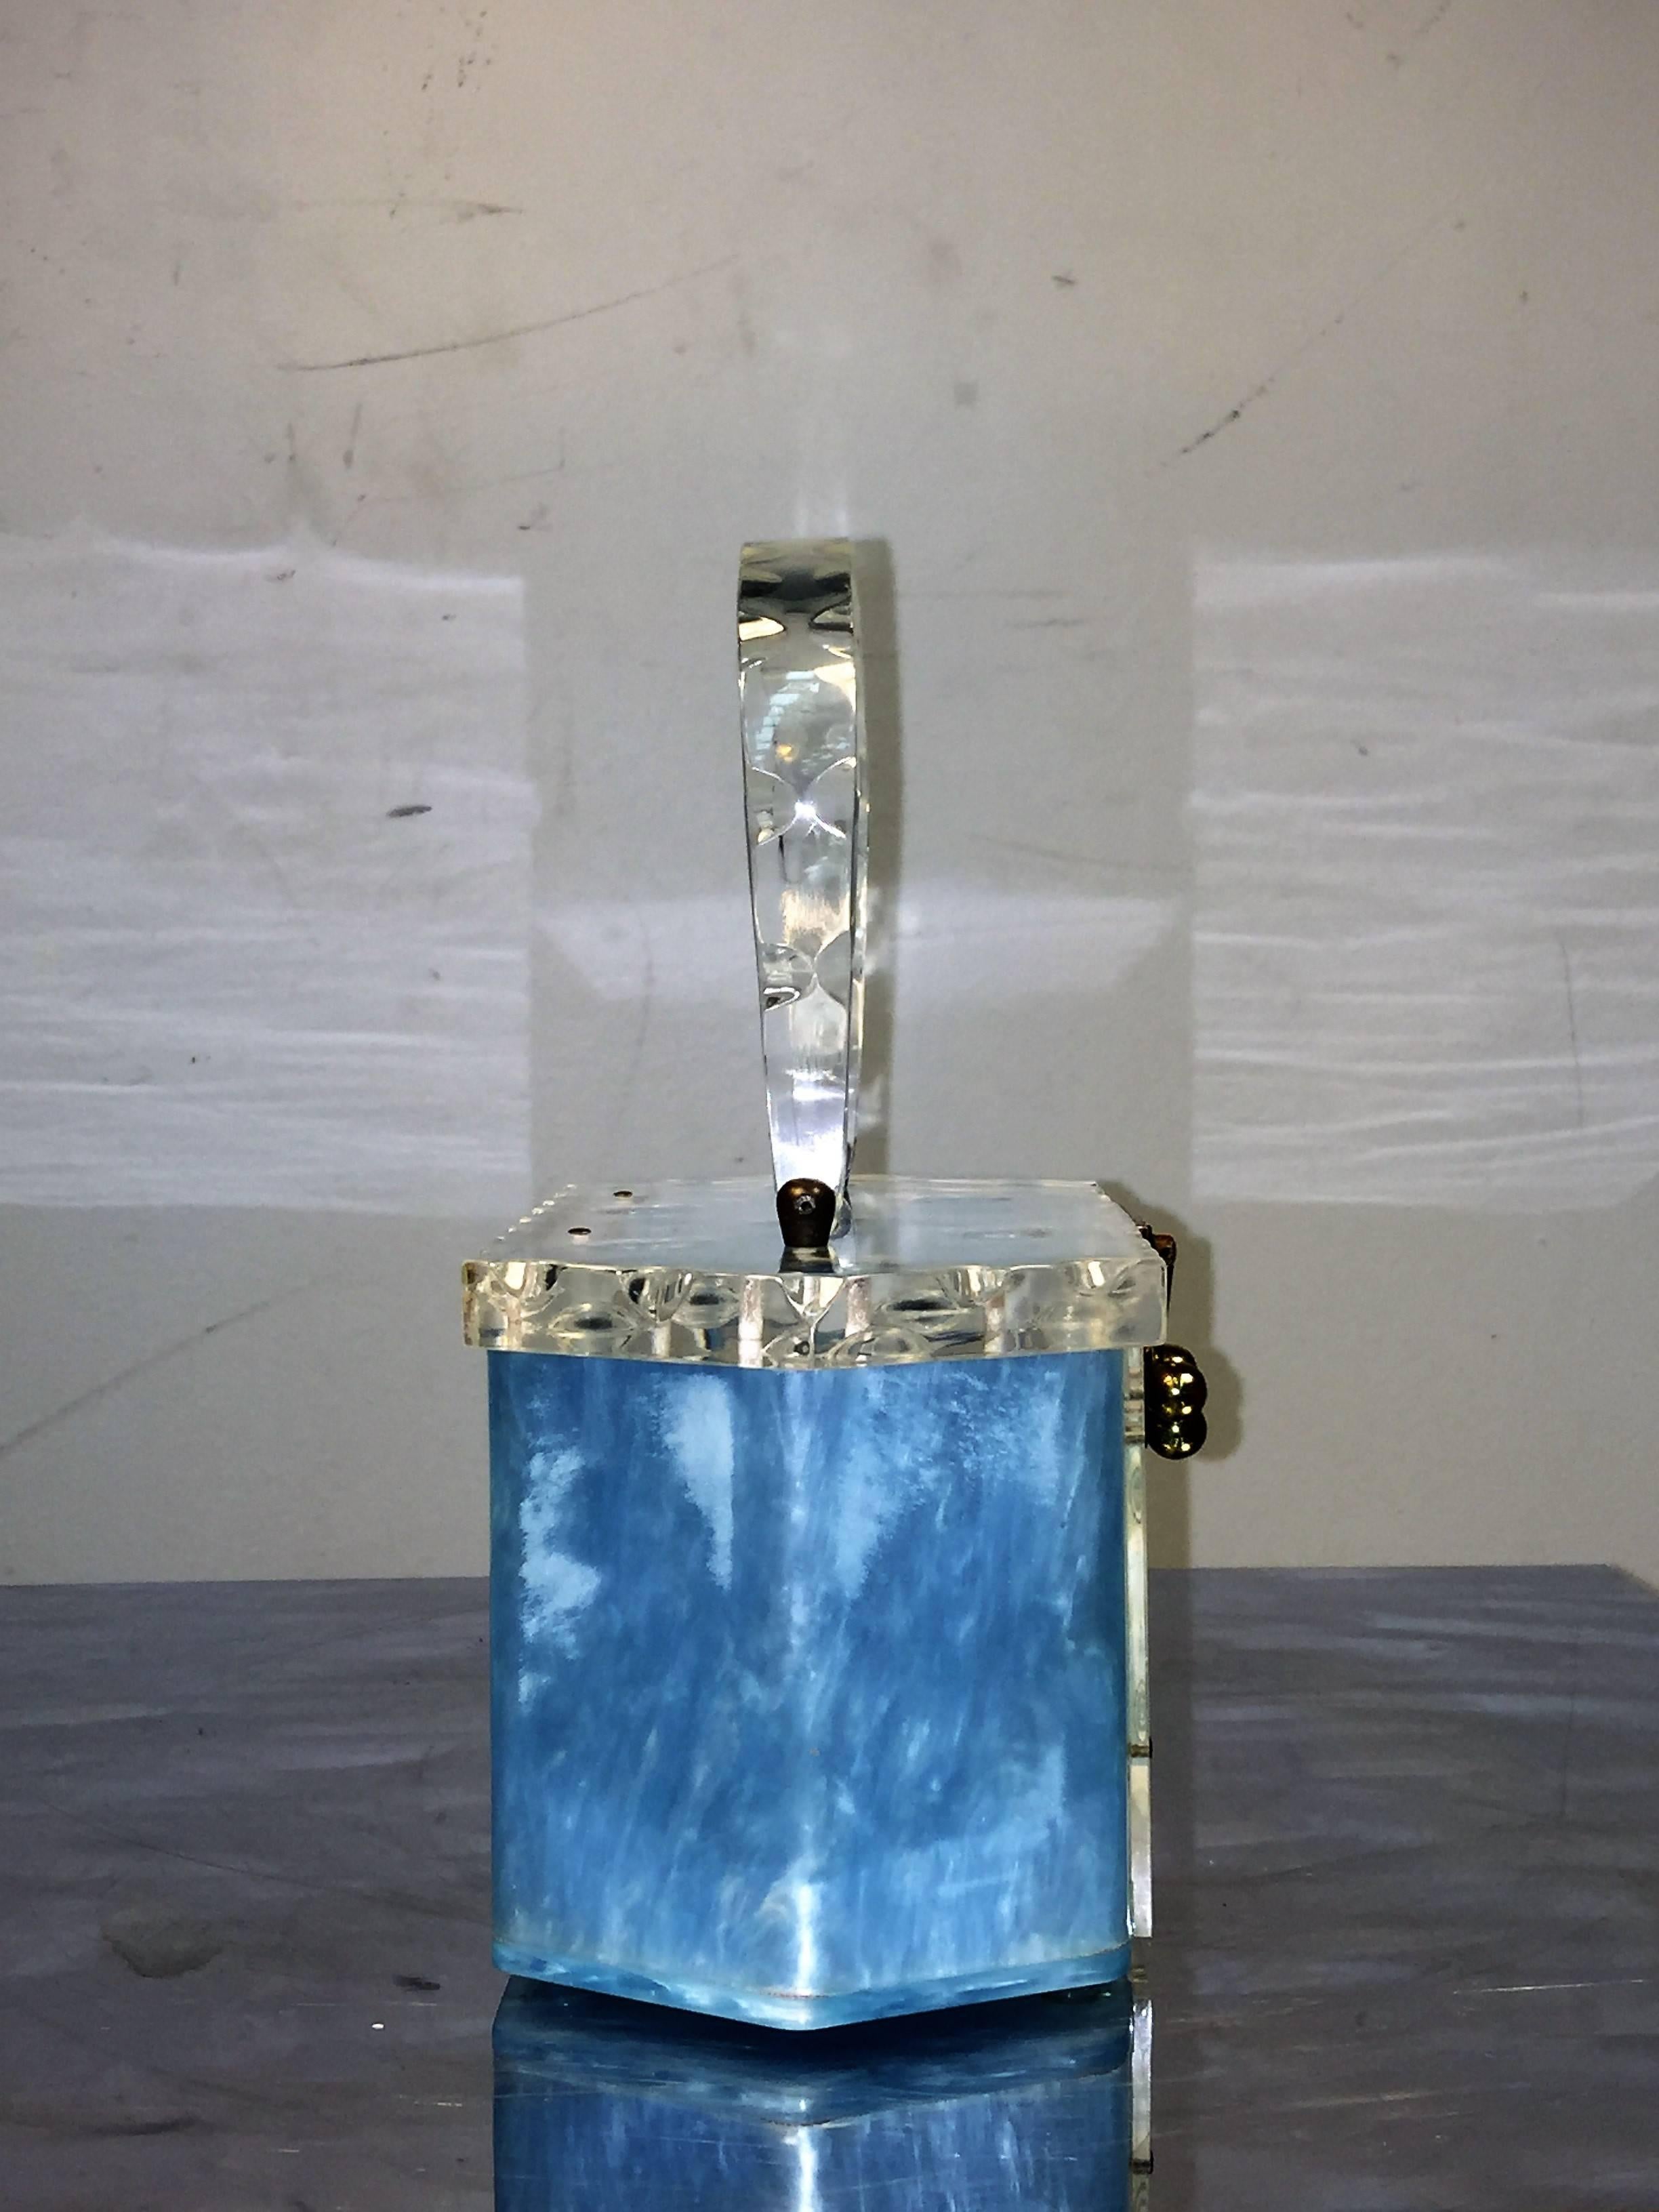 Great Aqua Blue and Clear Carved Lucite Handbag Hand Crafted in Florida in The 1950's.In Perfect Condition no cracks,Chips or damage.The Measurements are9